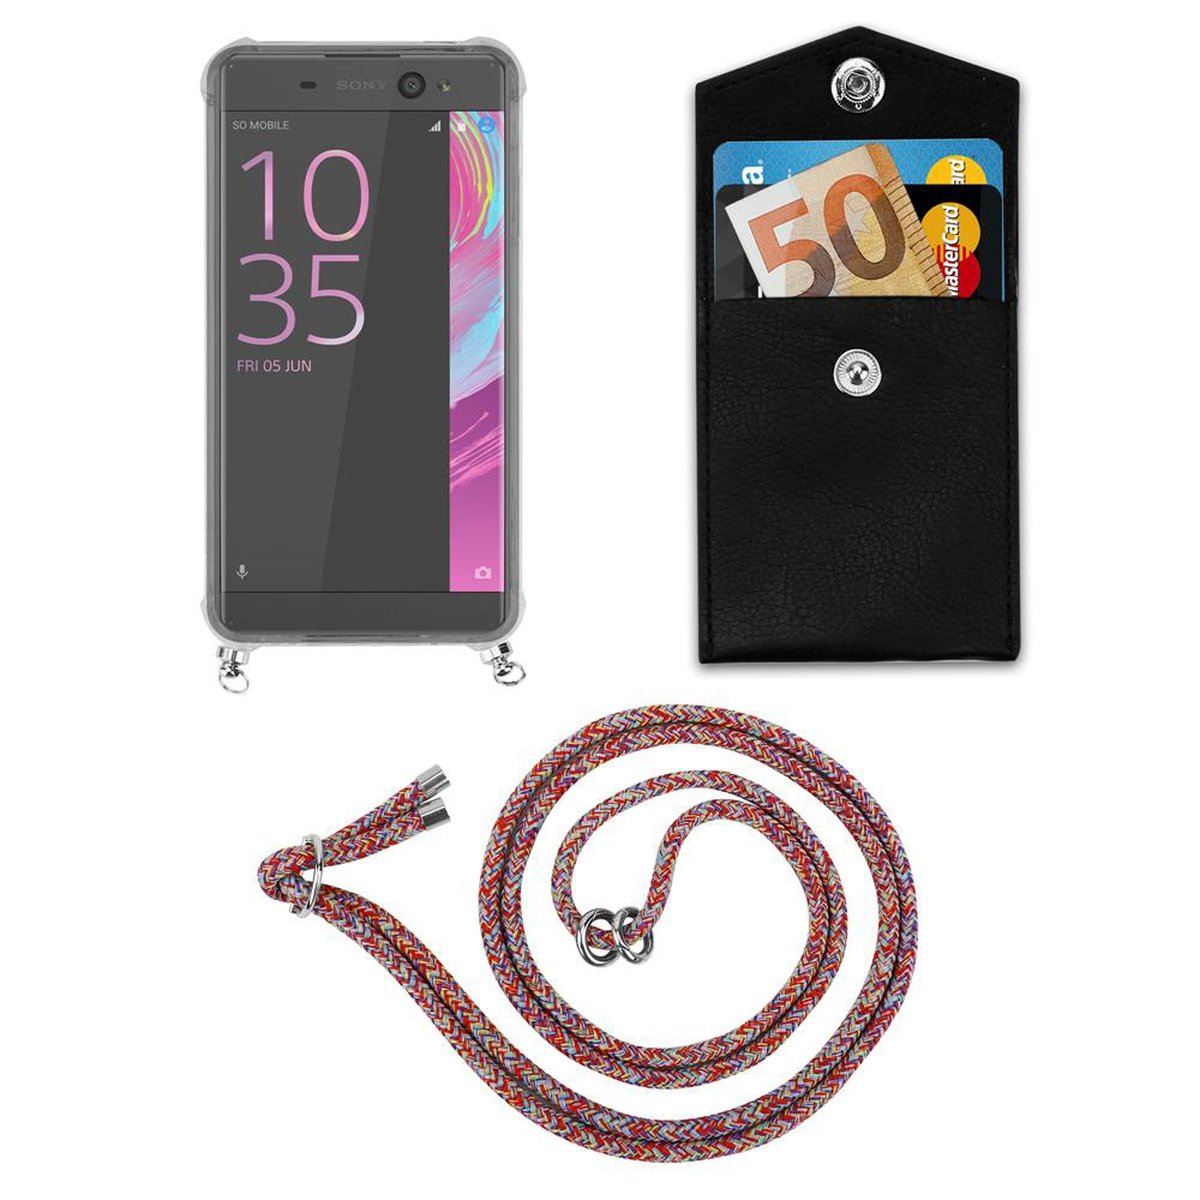 CADORABO Handy Kette Sony, Silber PARROT Kordel Ringen, Xperia Backcover, XA, und Hülle, COLORFUL mit Band abnehmbarer